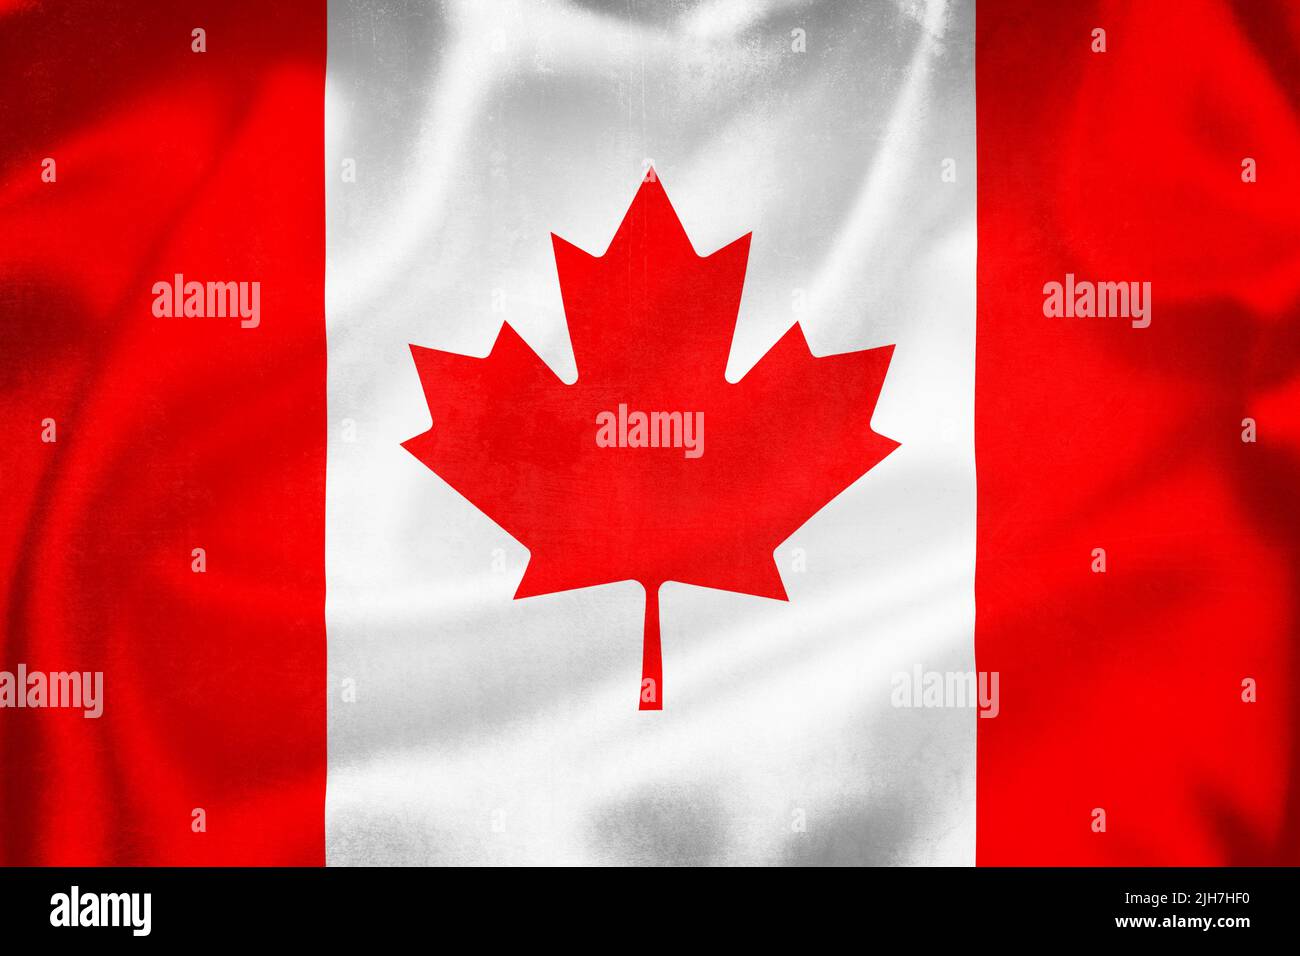 Grunge 3D illustration of Canada flag, concept of Canada Stock Photo